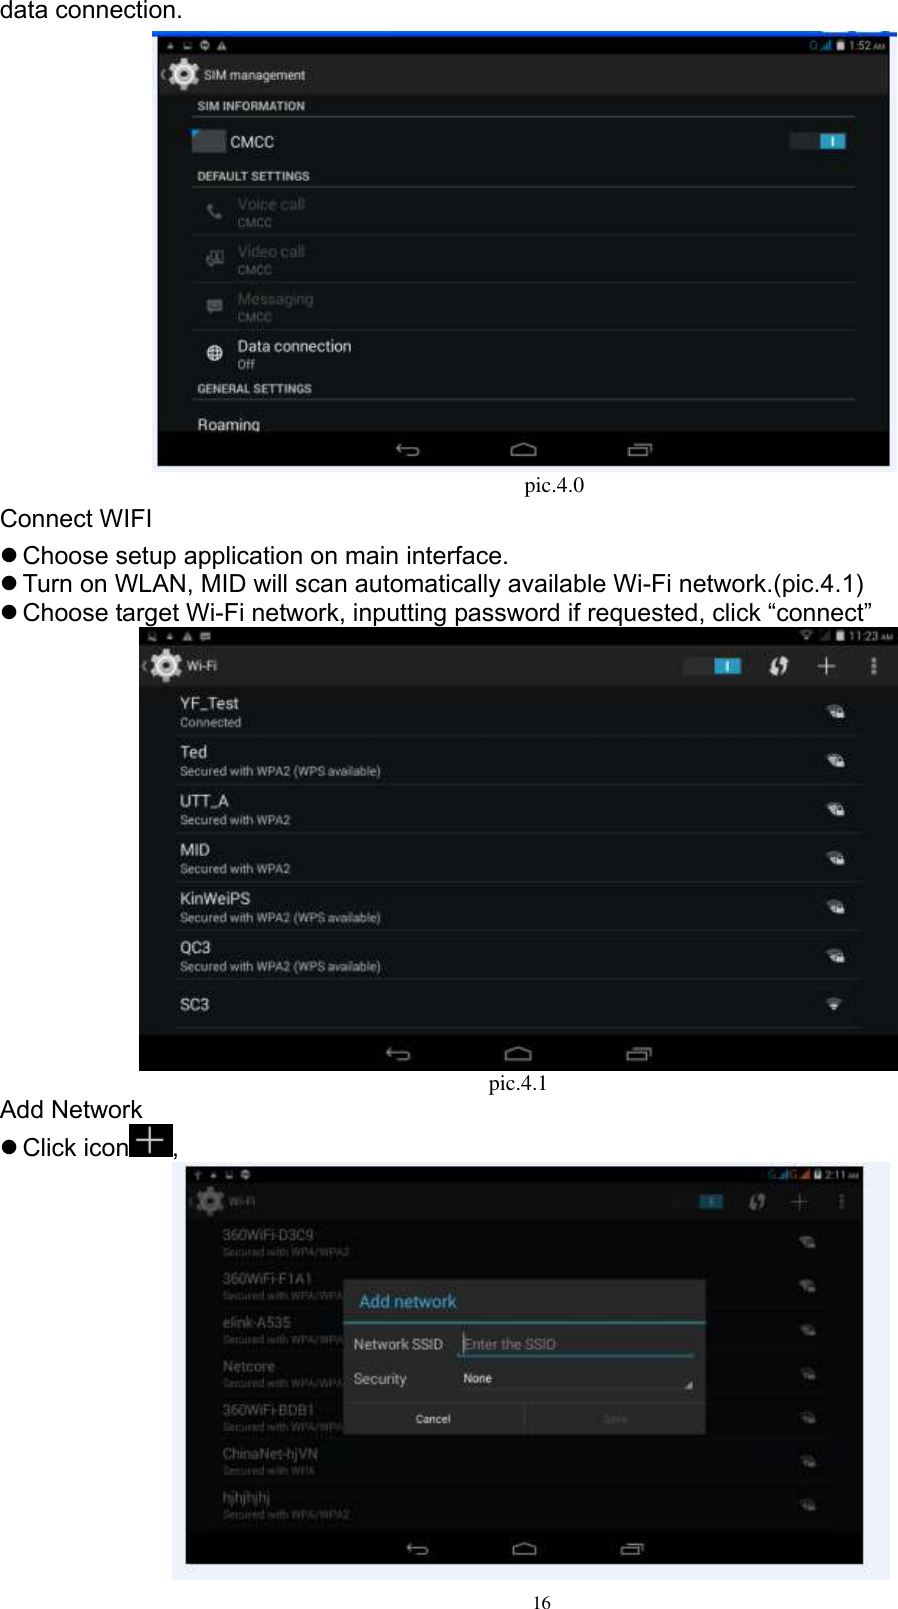      16 data connection.                                                                        pic.4.0 Connect WIFI  Choose setup application on main interface.  Turn on WLAN, MID will scan automatically available Wi-Fi network.(pic.4.1)  Choose target Wi-Fi network, inputting password if requested, click “connect”  pic.4.1 Add Network  Click icon ,    